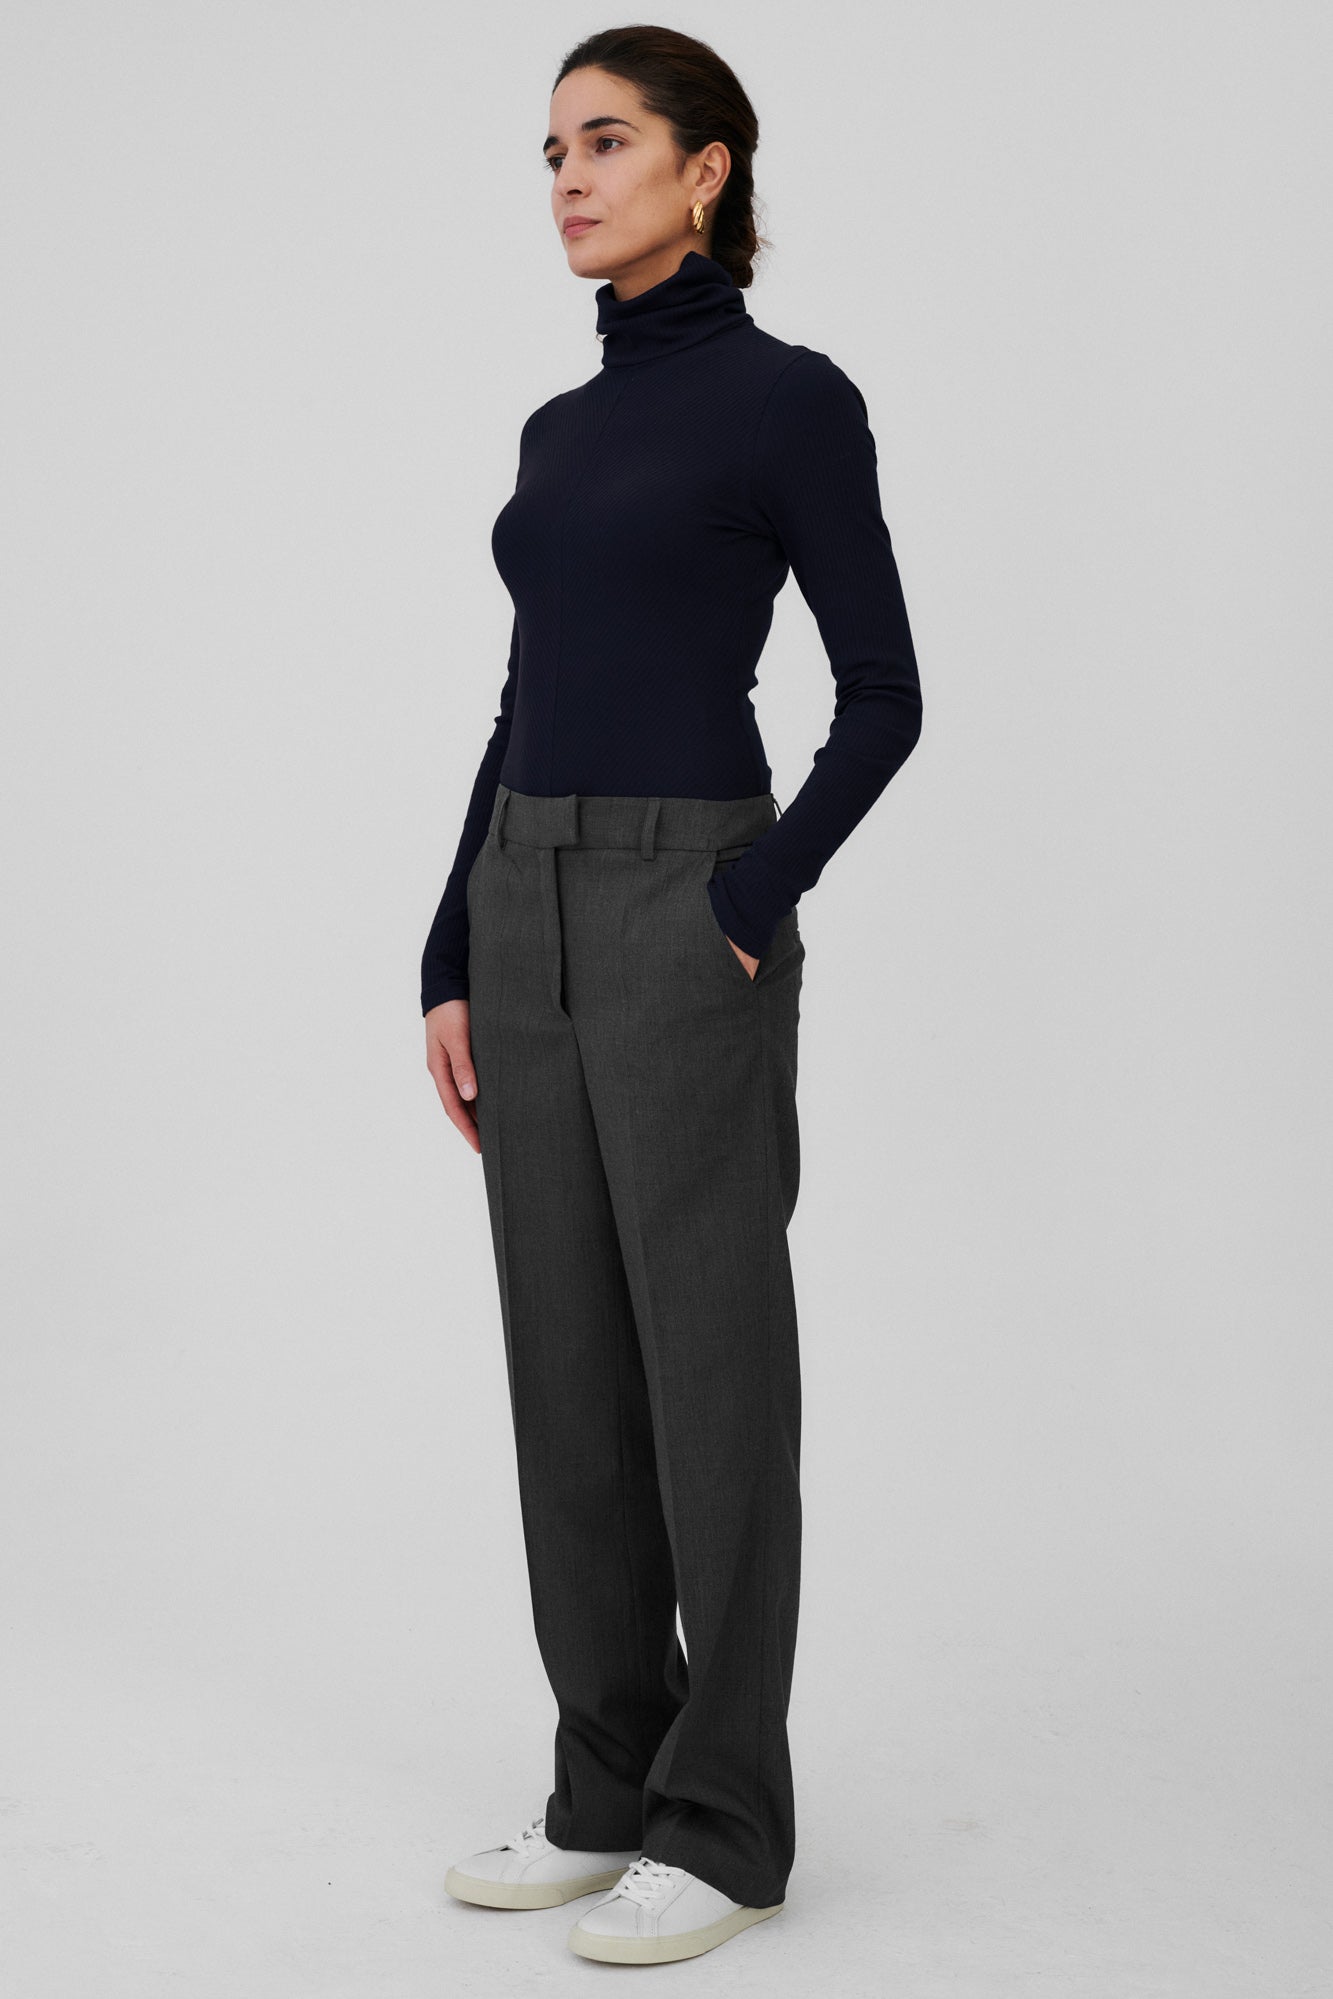 Wool blend trousers / 05 / 15 / granite grey *bodysuit-in-organic-cotton-01-34-night-blue* ?The model is 176cm tall and wears size S?